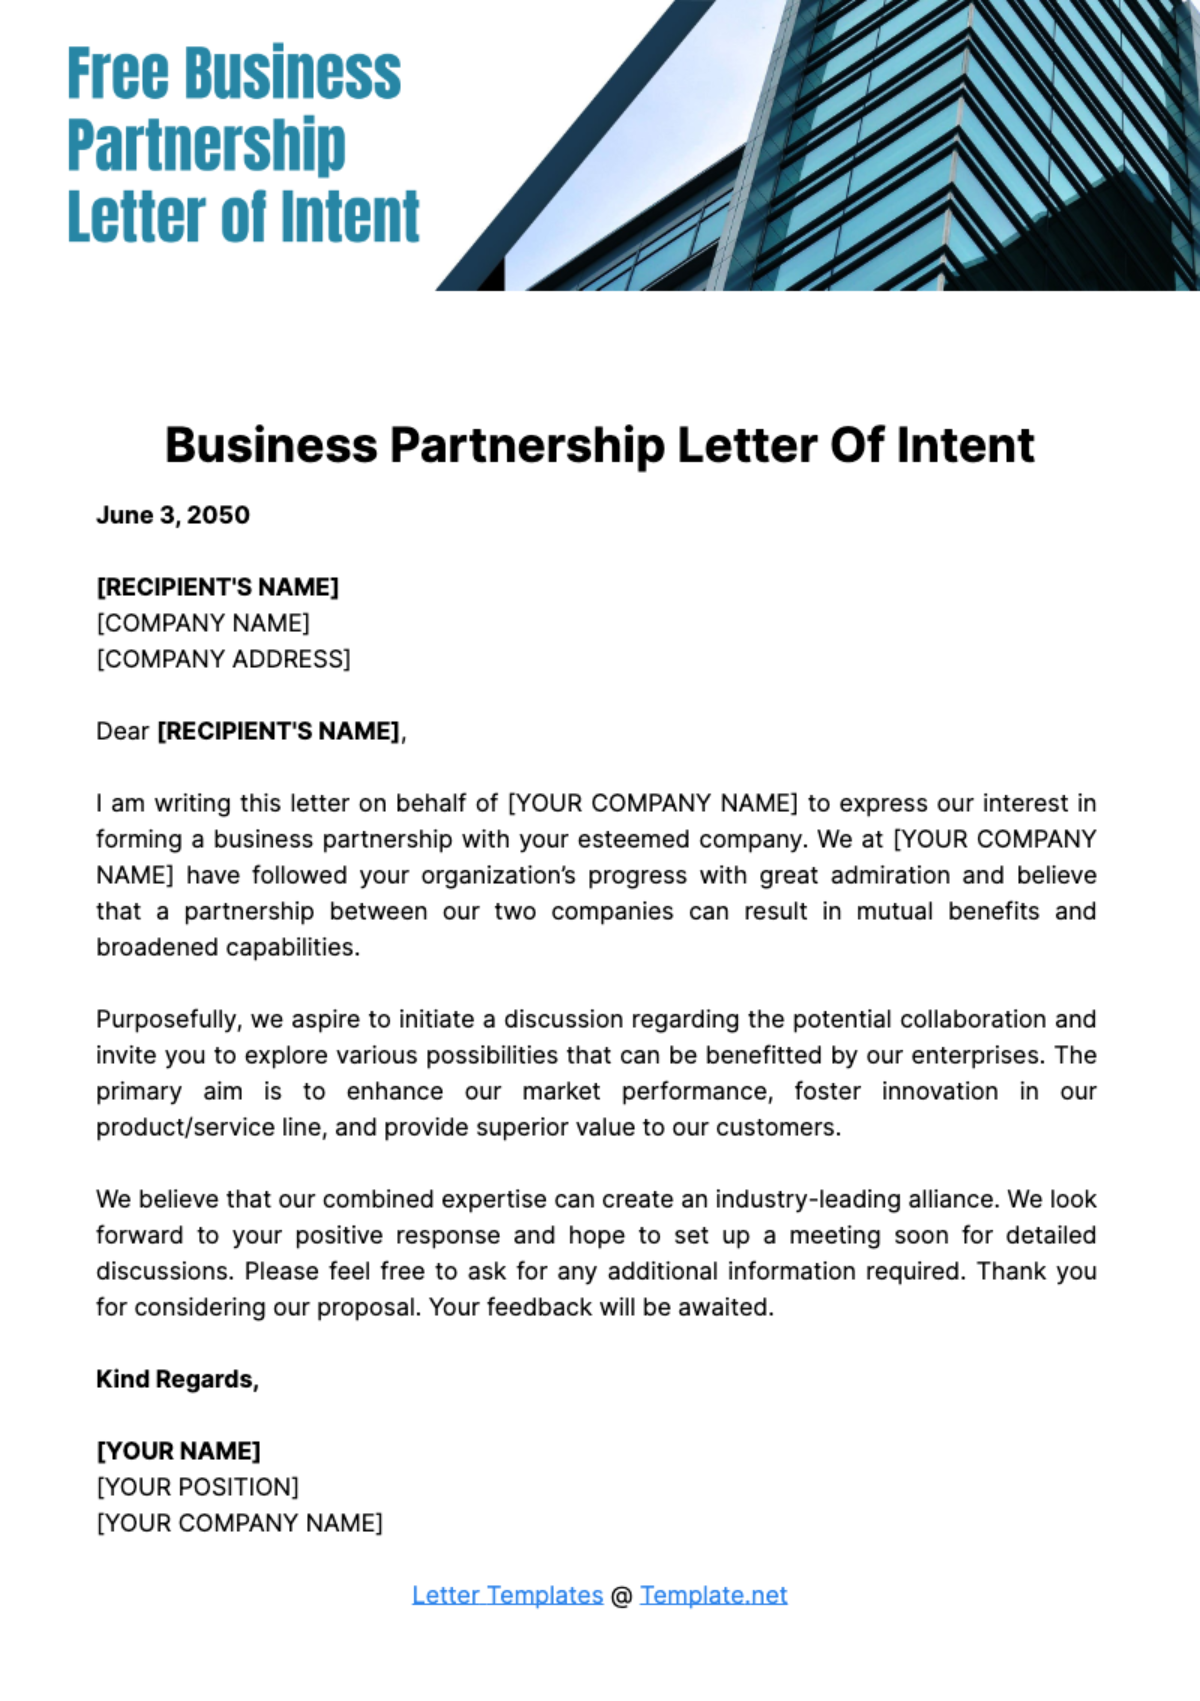 Business Partnership Letter of Intent Template